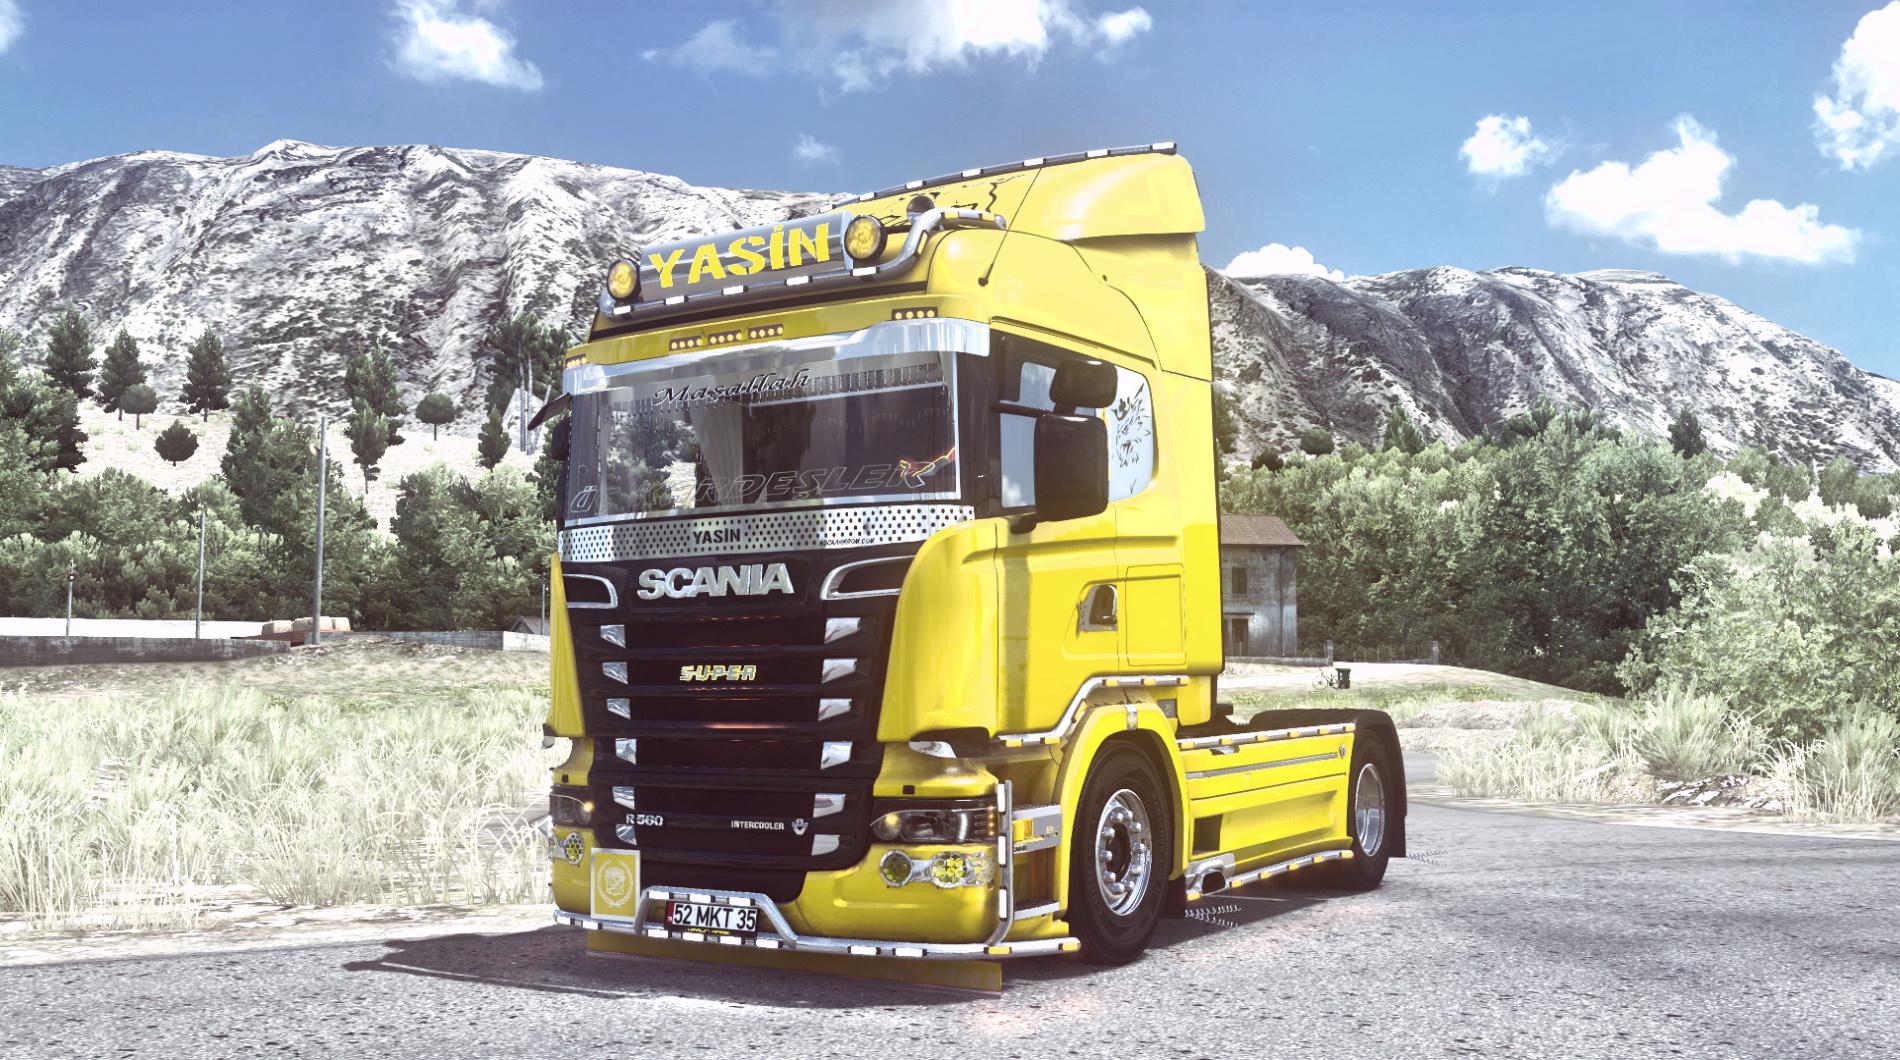 Ets2 Clm Realistic Graphics Reshade V13 137x Euro Truck